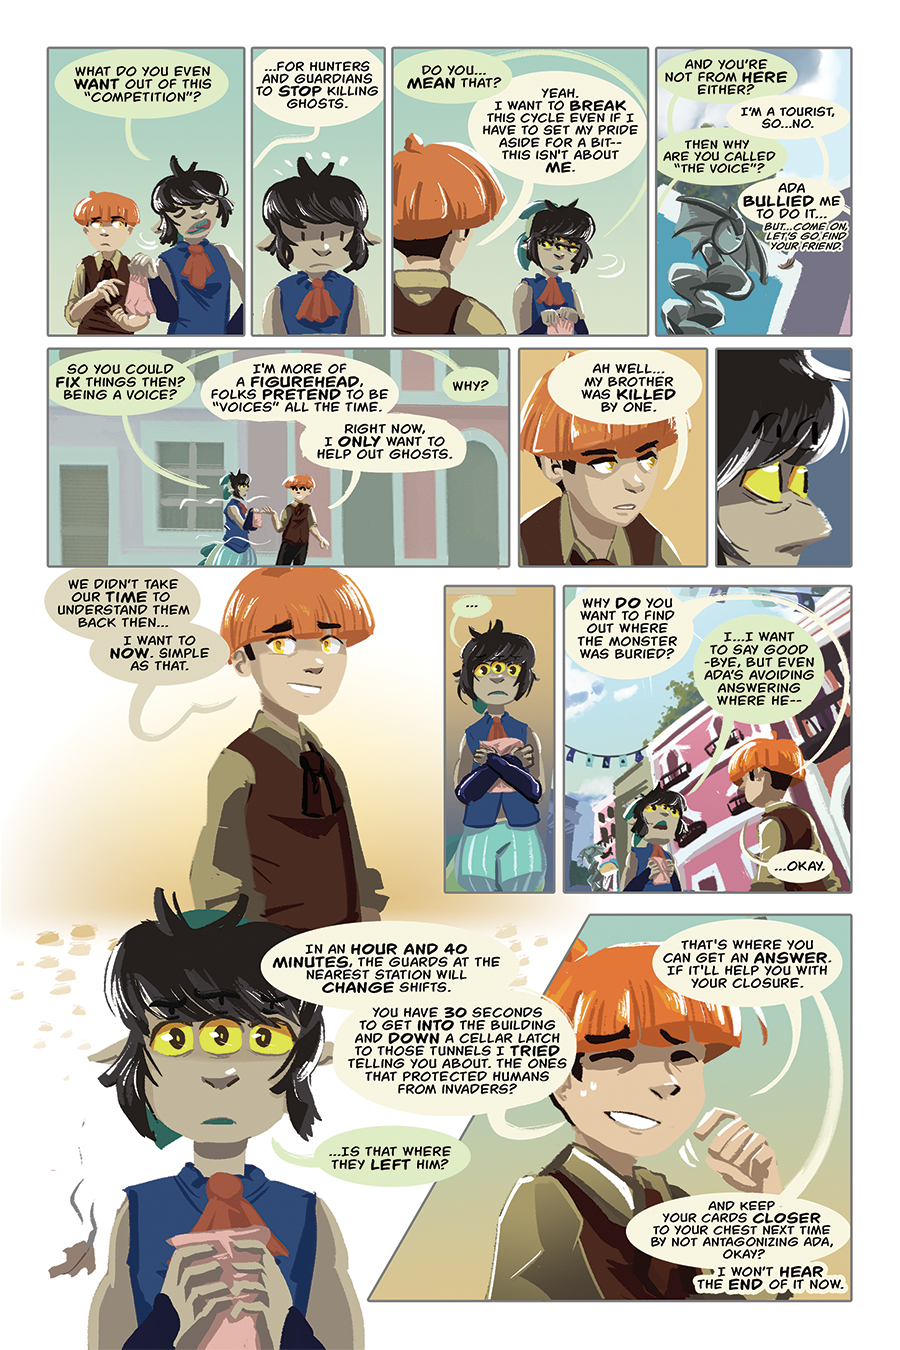 Chapter 8, page 15